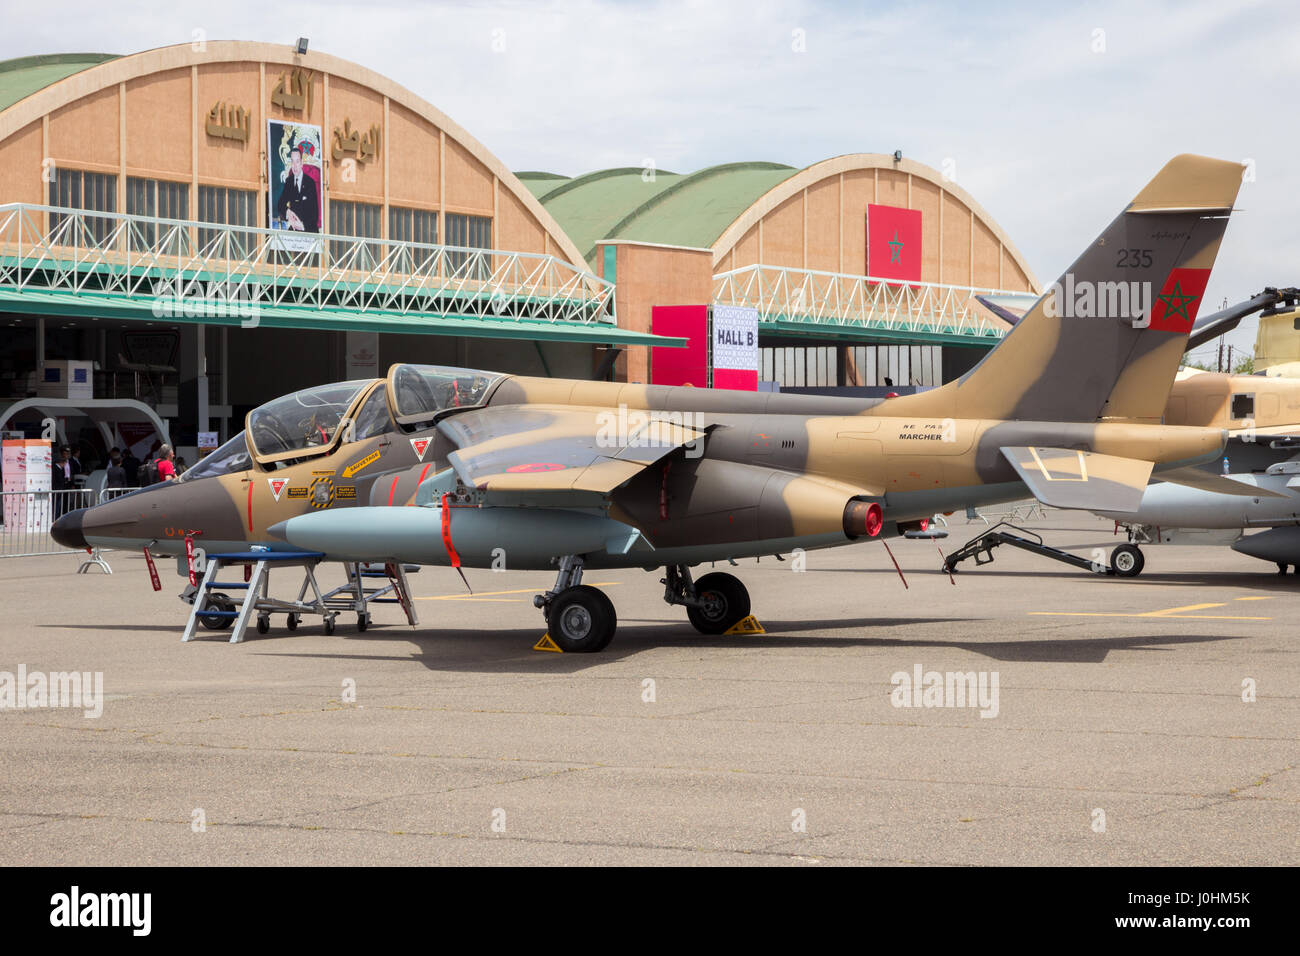 MARRAKECH, MOROCCO - APR 28, 2016: Royal Moroccan Air Force Dassault Alpha Jet fighter jet on display at the Marrakech Air Show Stock Photo